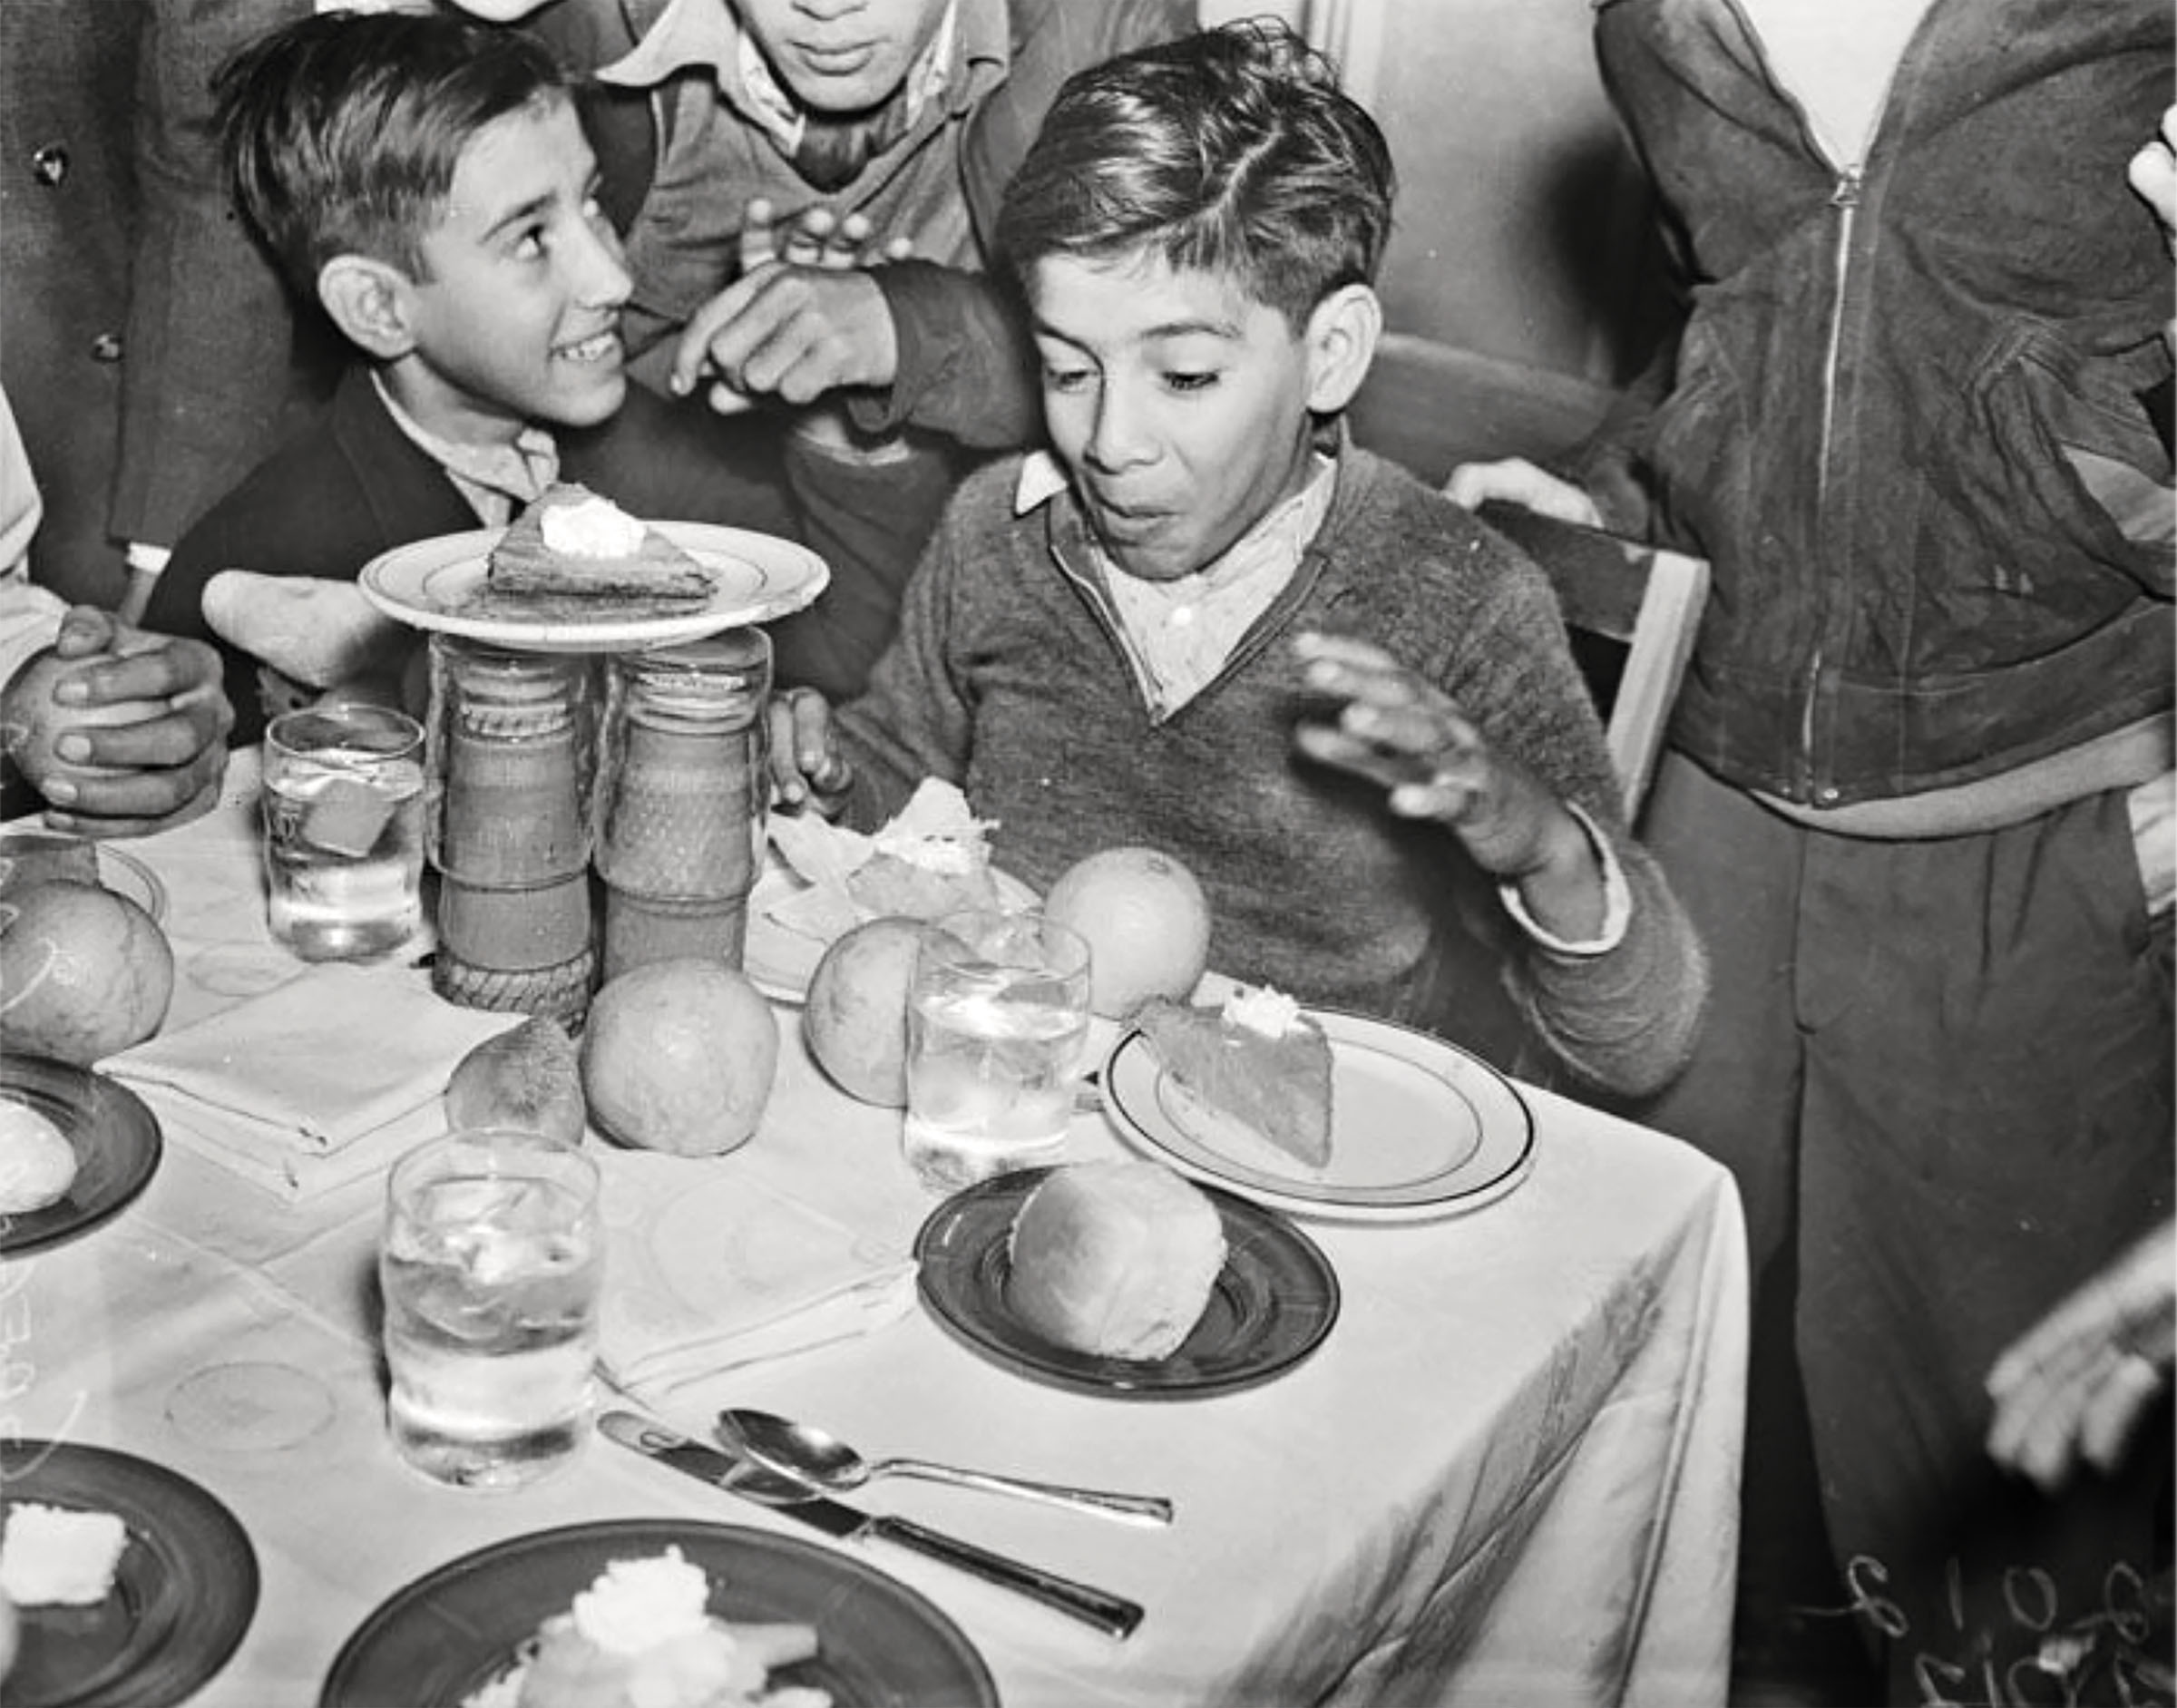 A young man makes an excited expression as he looks at a table with a Christmas feast